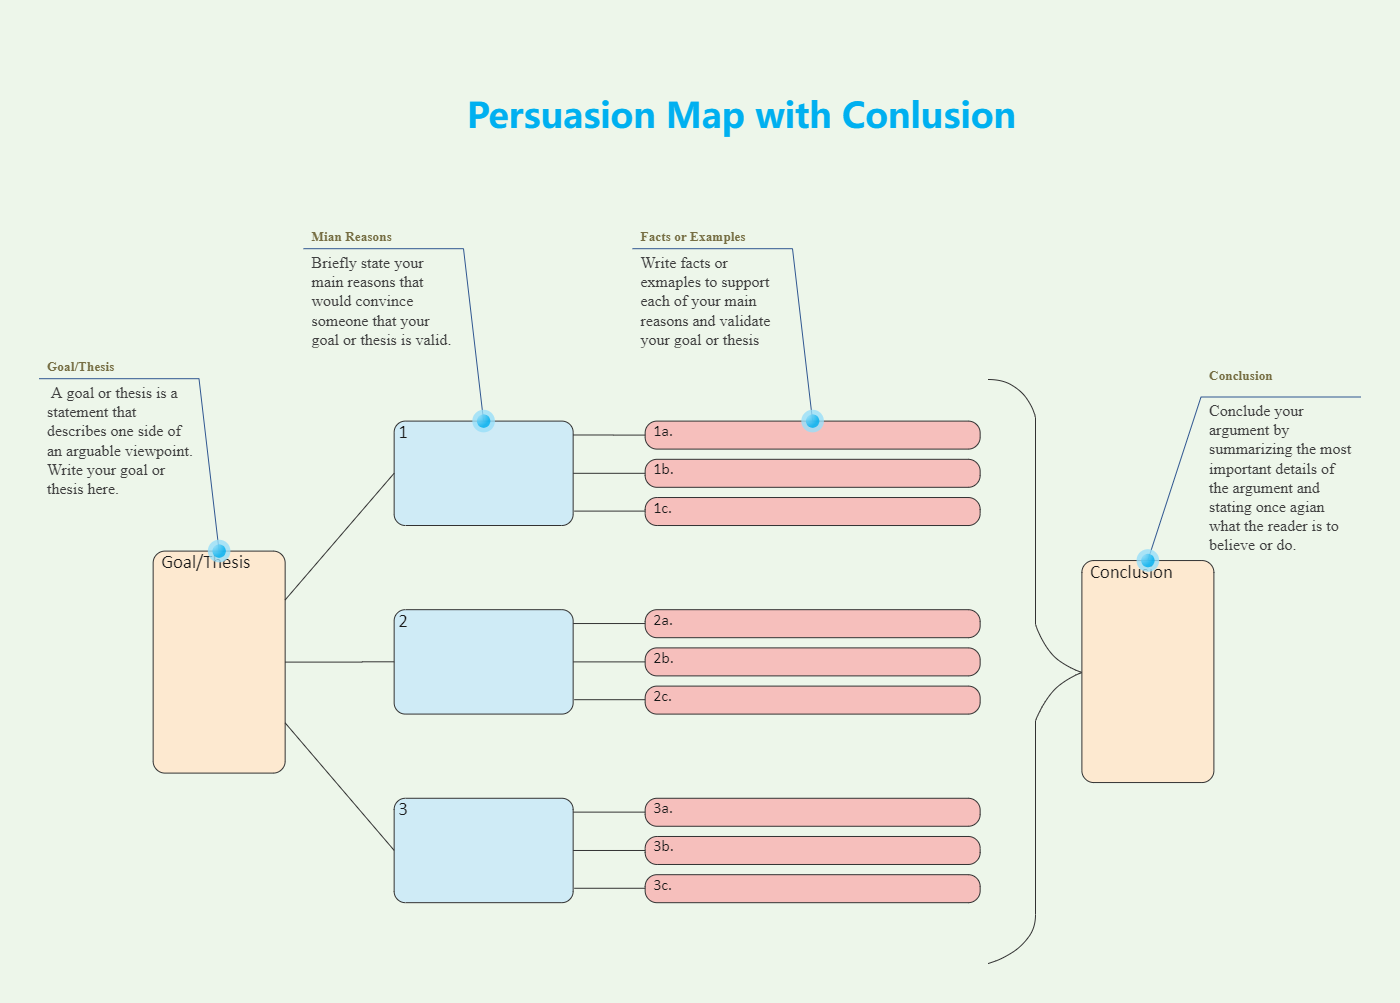 Persuasion Map with Conlusion